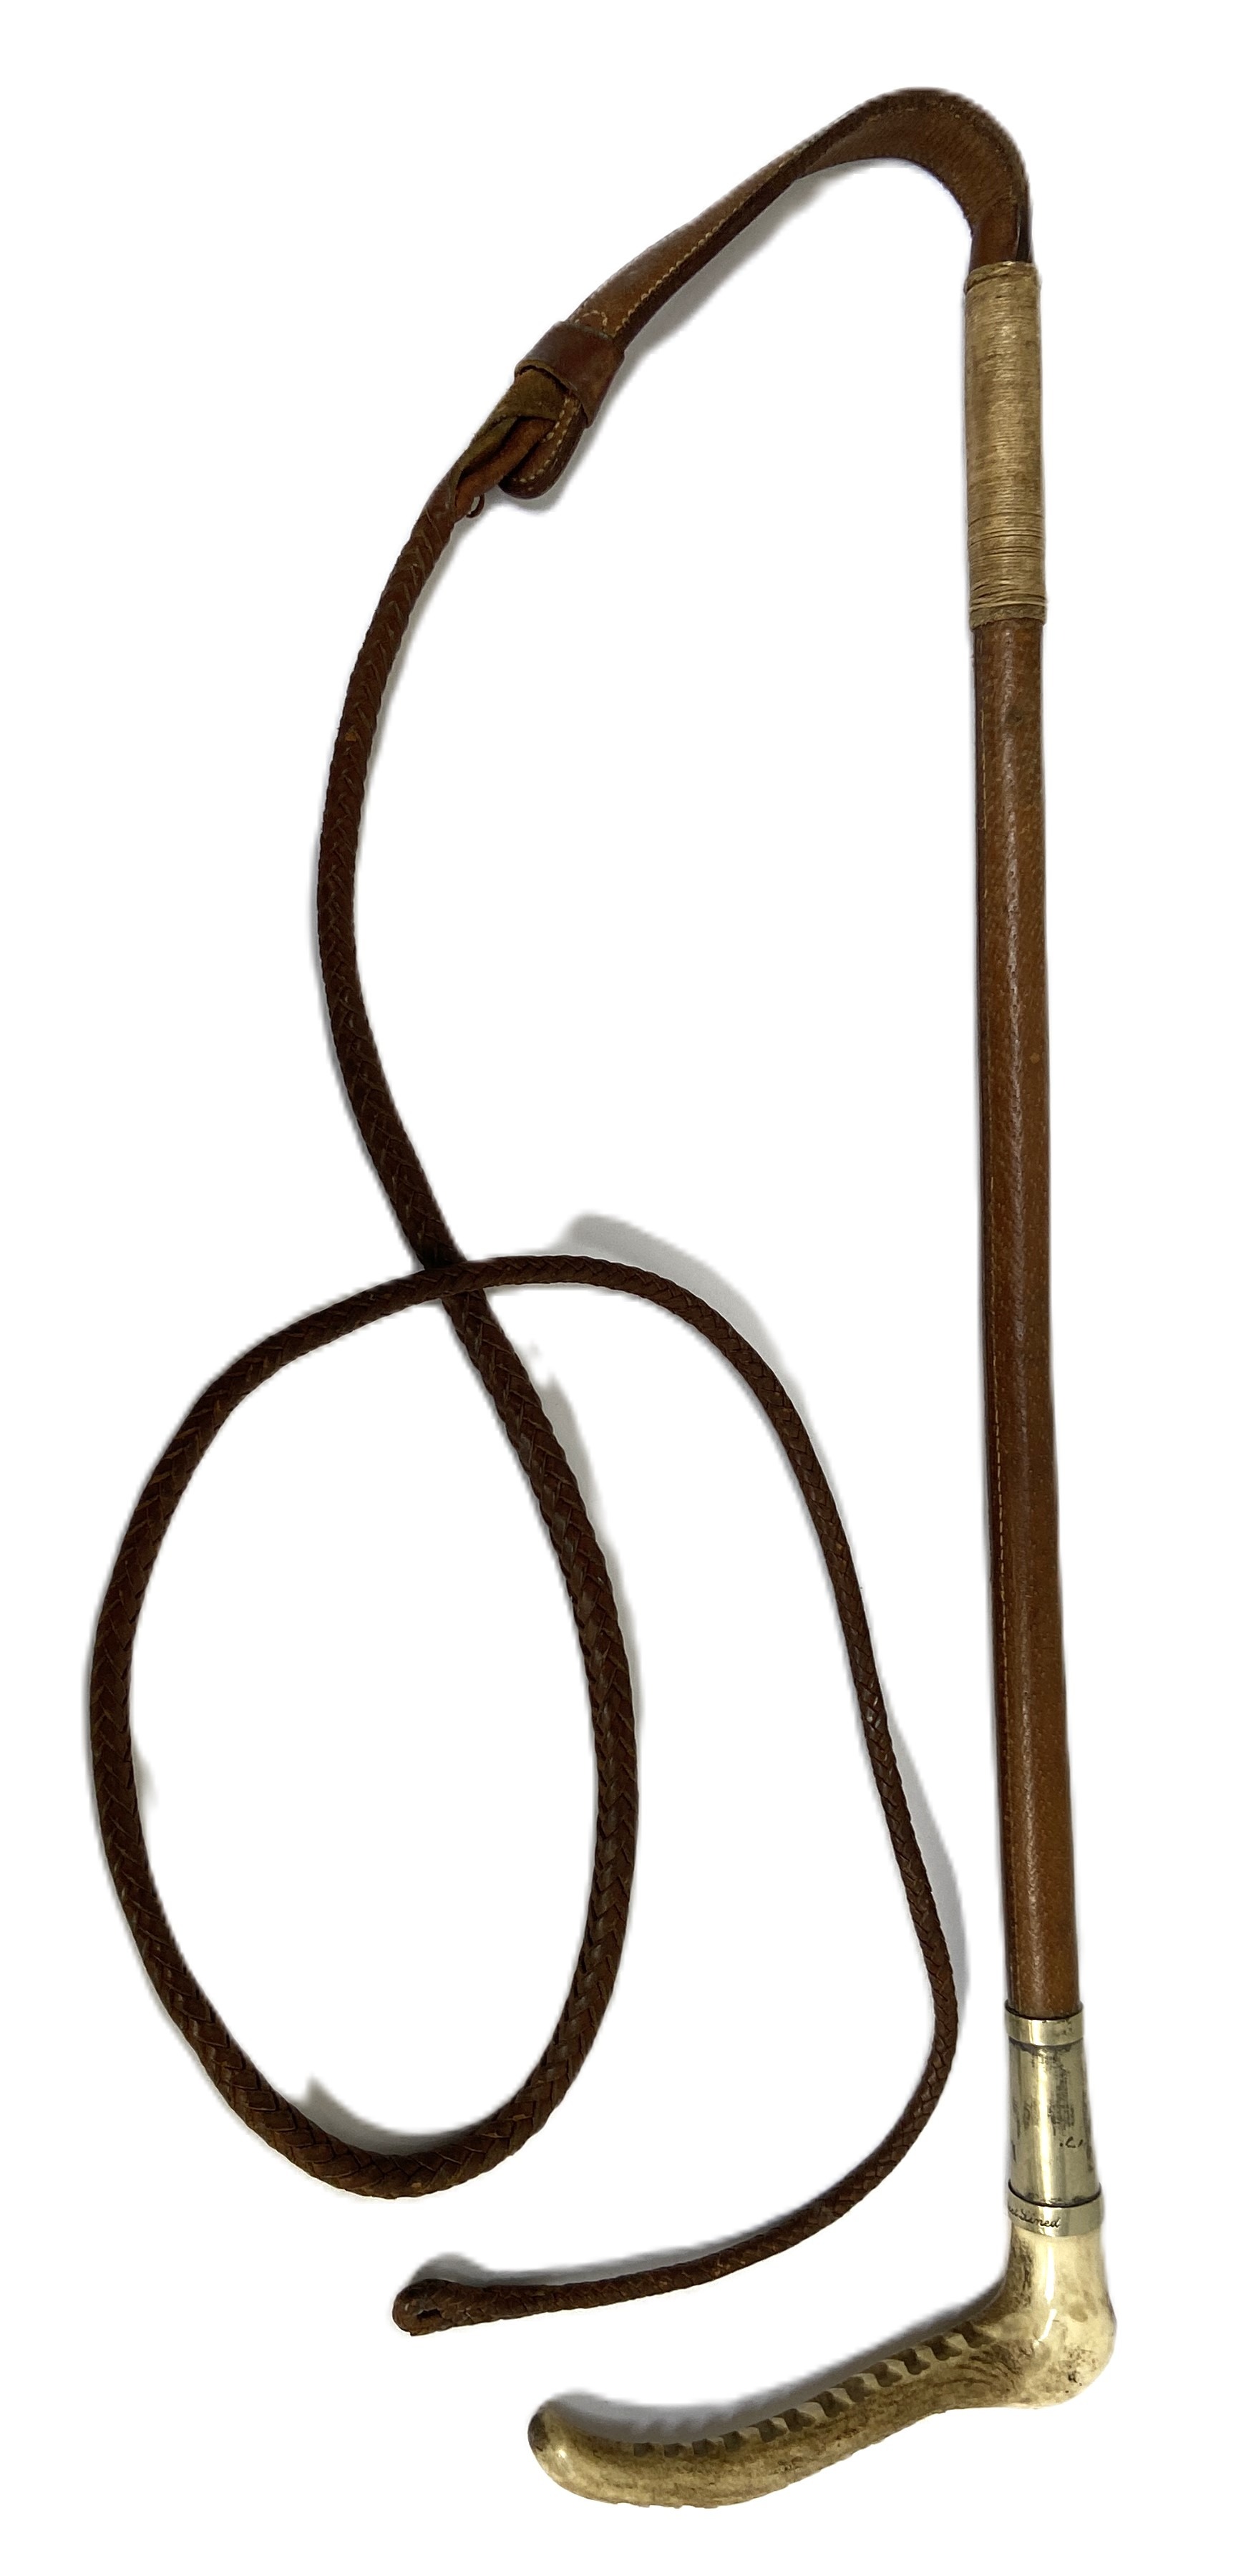 A vintage riding whip, circa 1930, with horn handle and leather shaft and woven whip